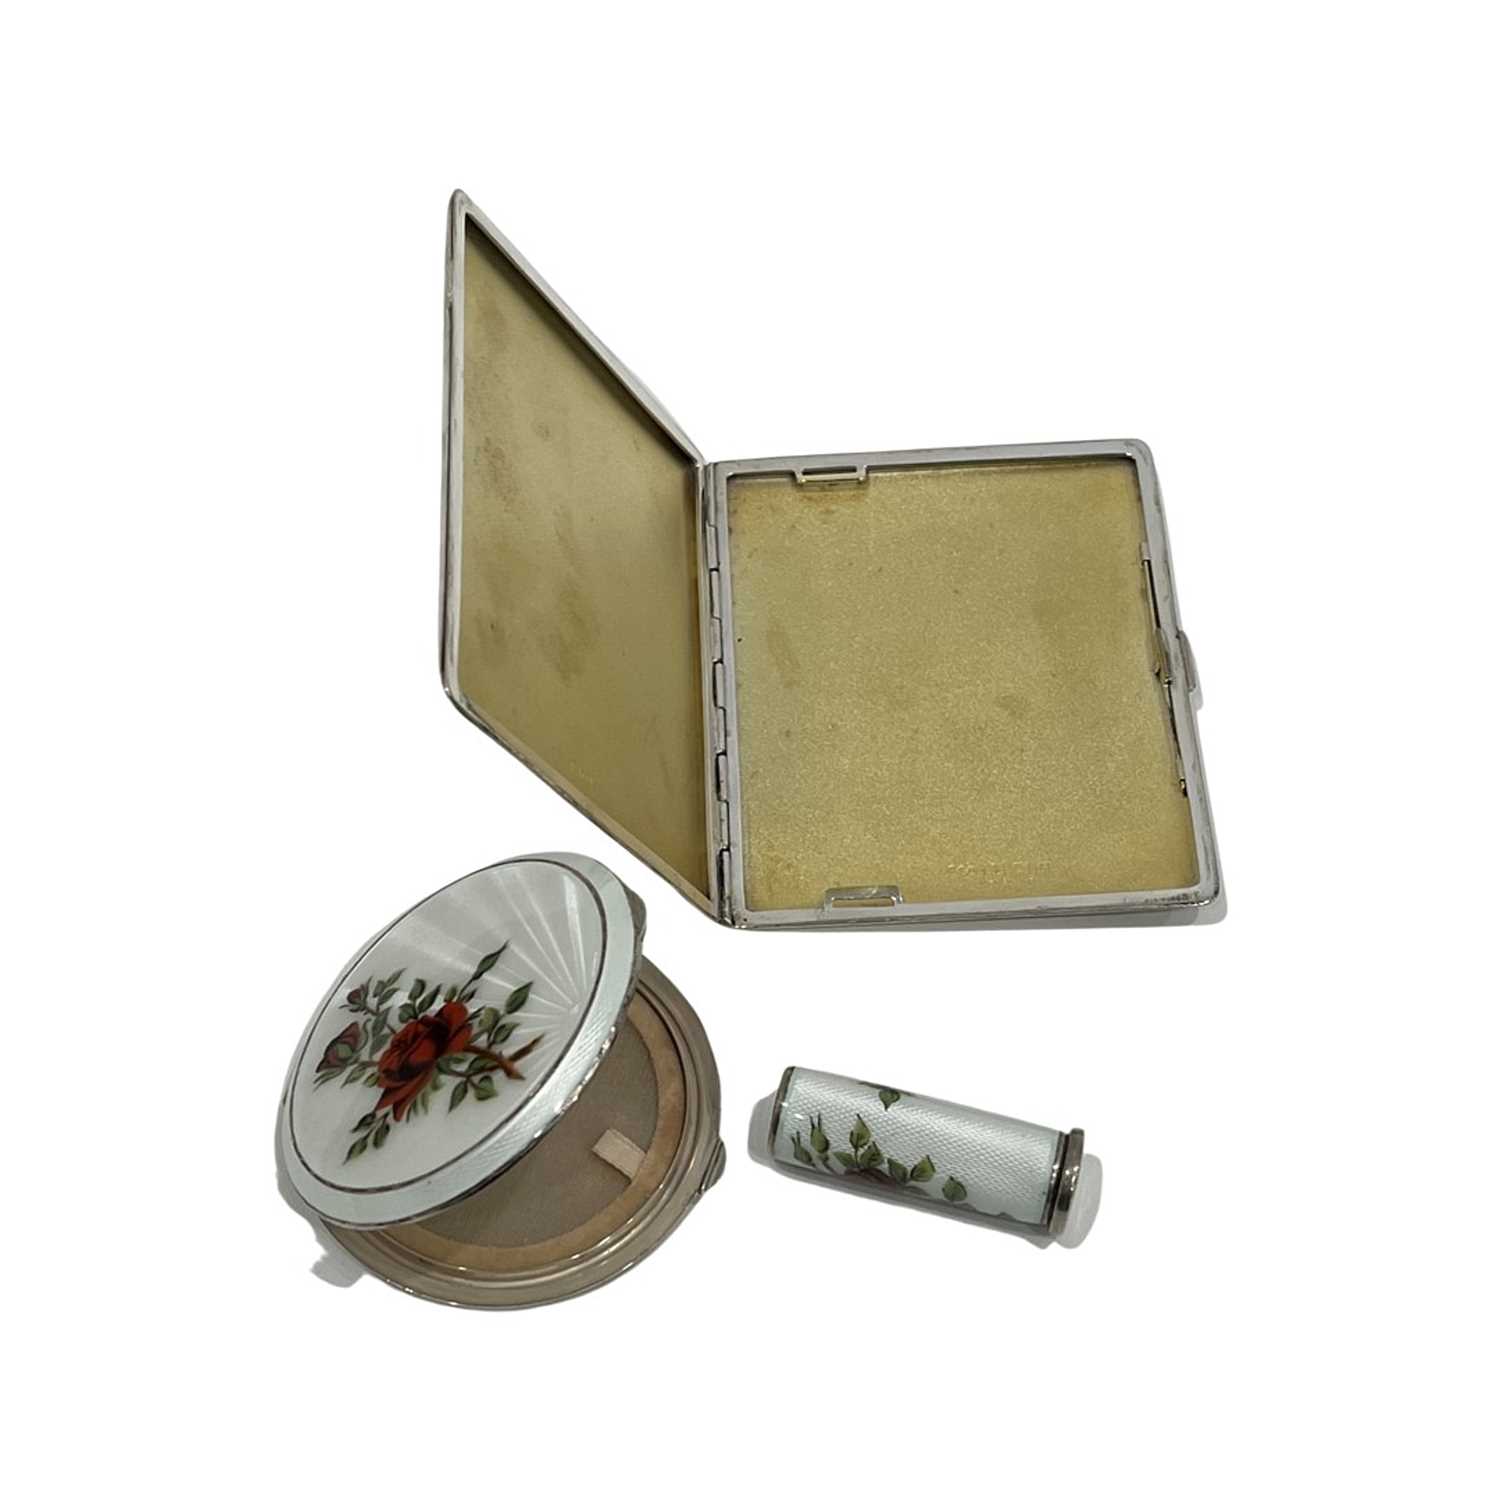 A 1960'S SILVER AND ENAMEL COMPACT, CIGARETTE CASE AND LIPSTICK HOLDER - Image 2 of 3